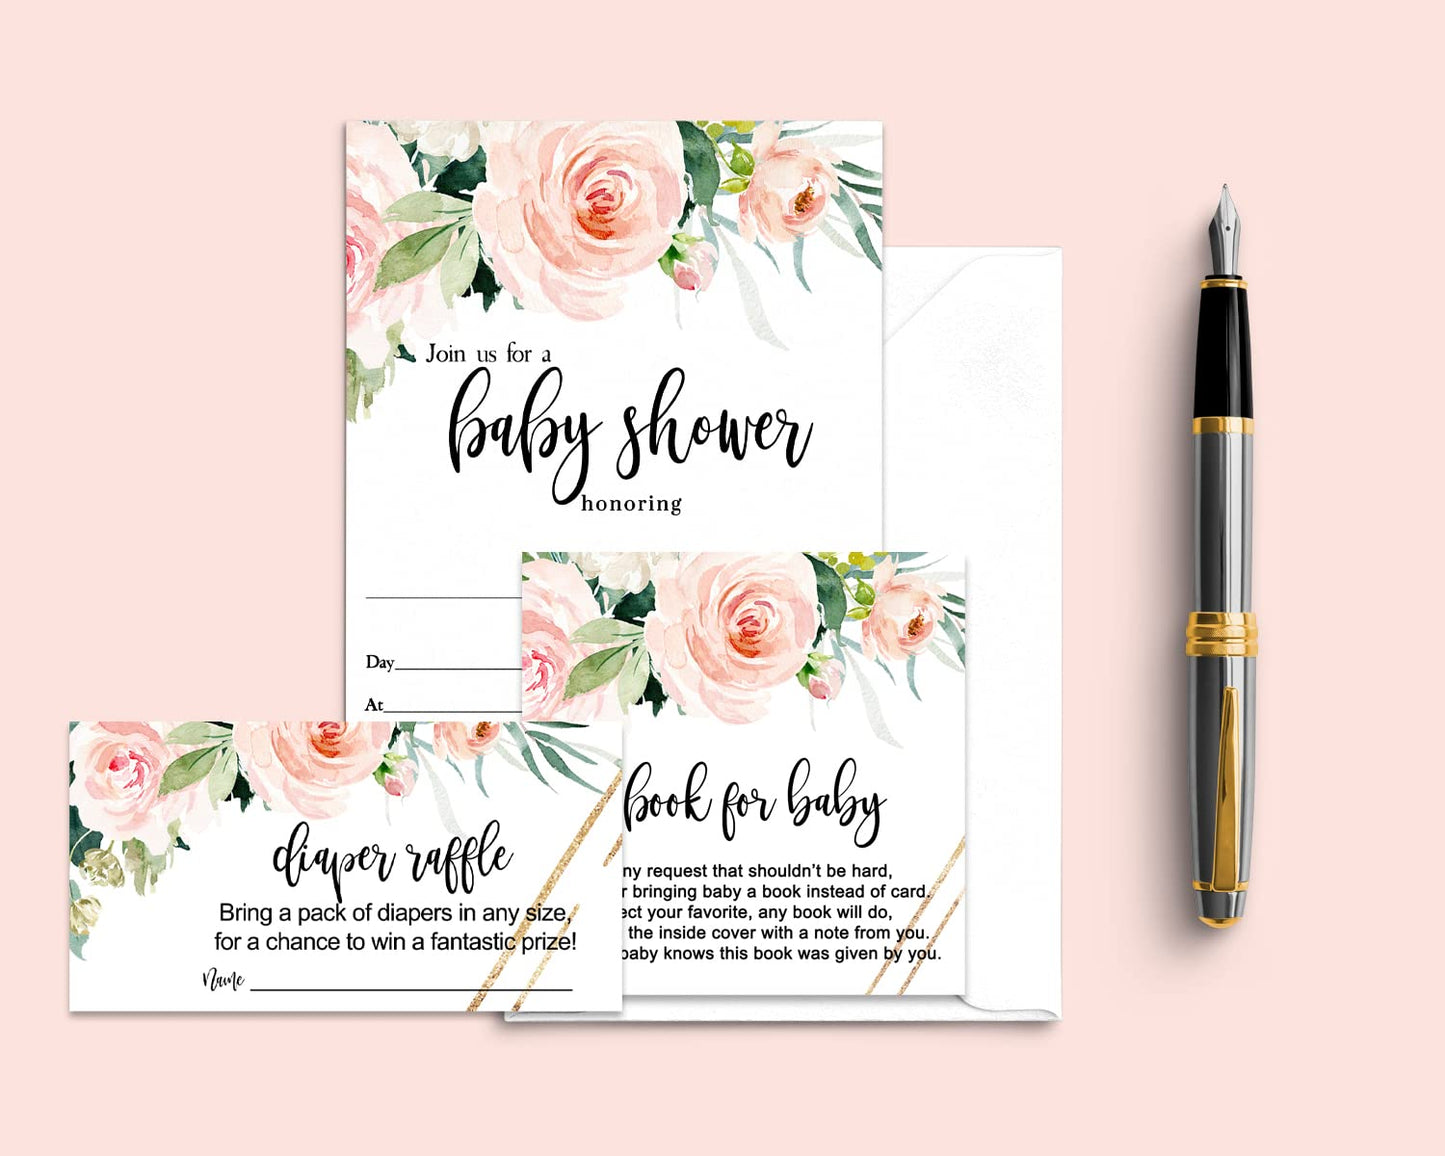 Paper Clever Party Graceful Floral Baby Shower Invitation KitPaper Clever Party